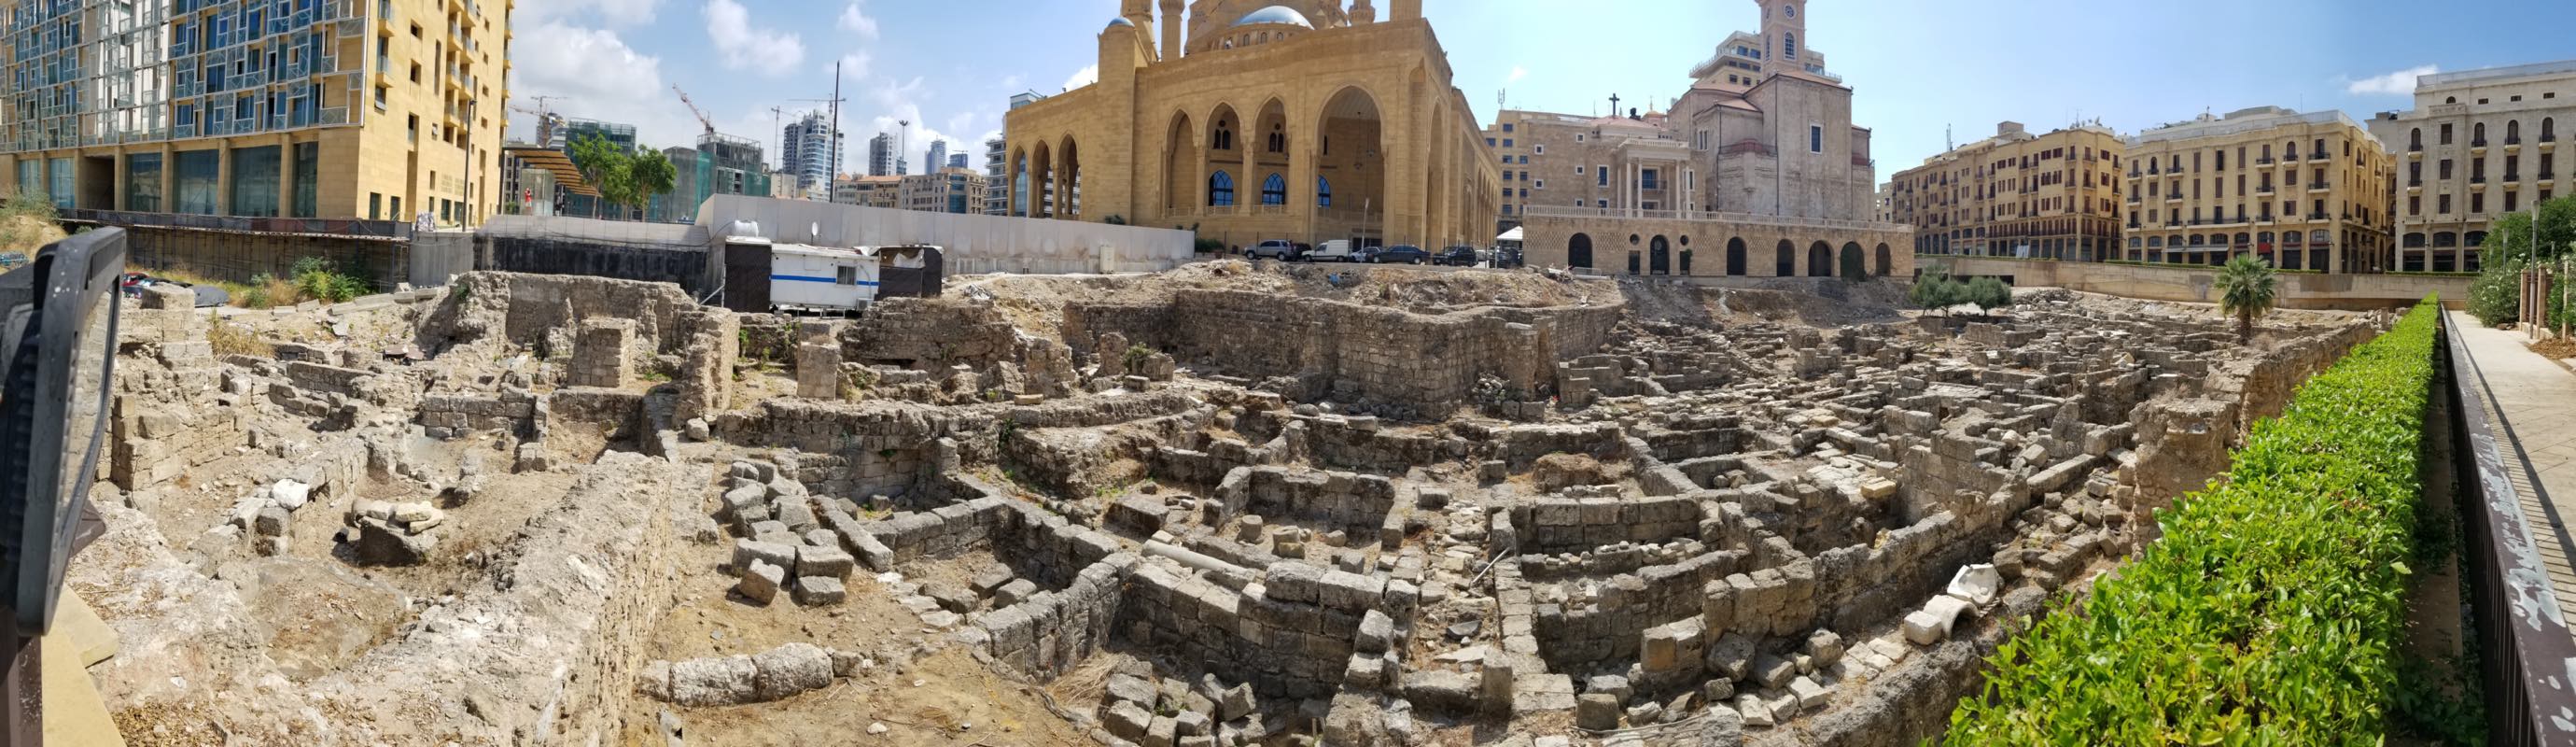 Garden of Forgiveness - Panorama view of archaeological site with St. George Maronite Cathedral and Muhammad al-Amin Mosque in background.&nbsp;